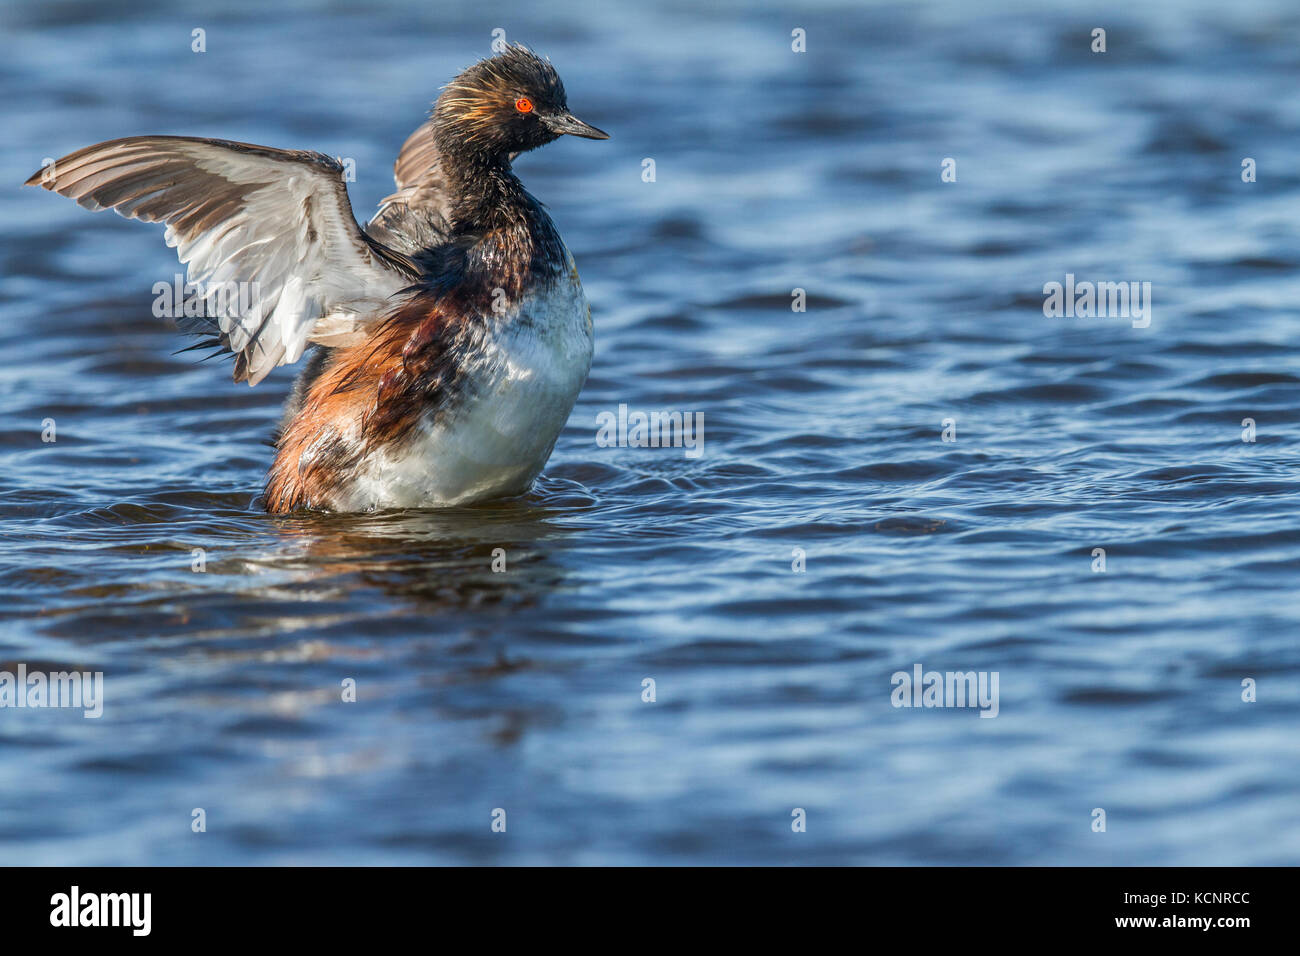 Eared Grebe, (Podiceps nigricollis) Beautiful colored grebe, standing in water and flapping her wings. Weed Lake, Alberta, Canada Stock Photo